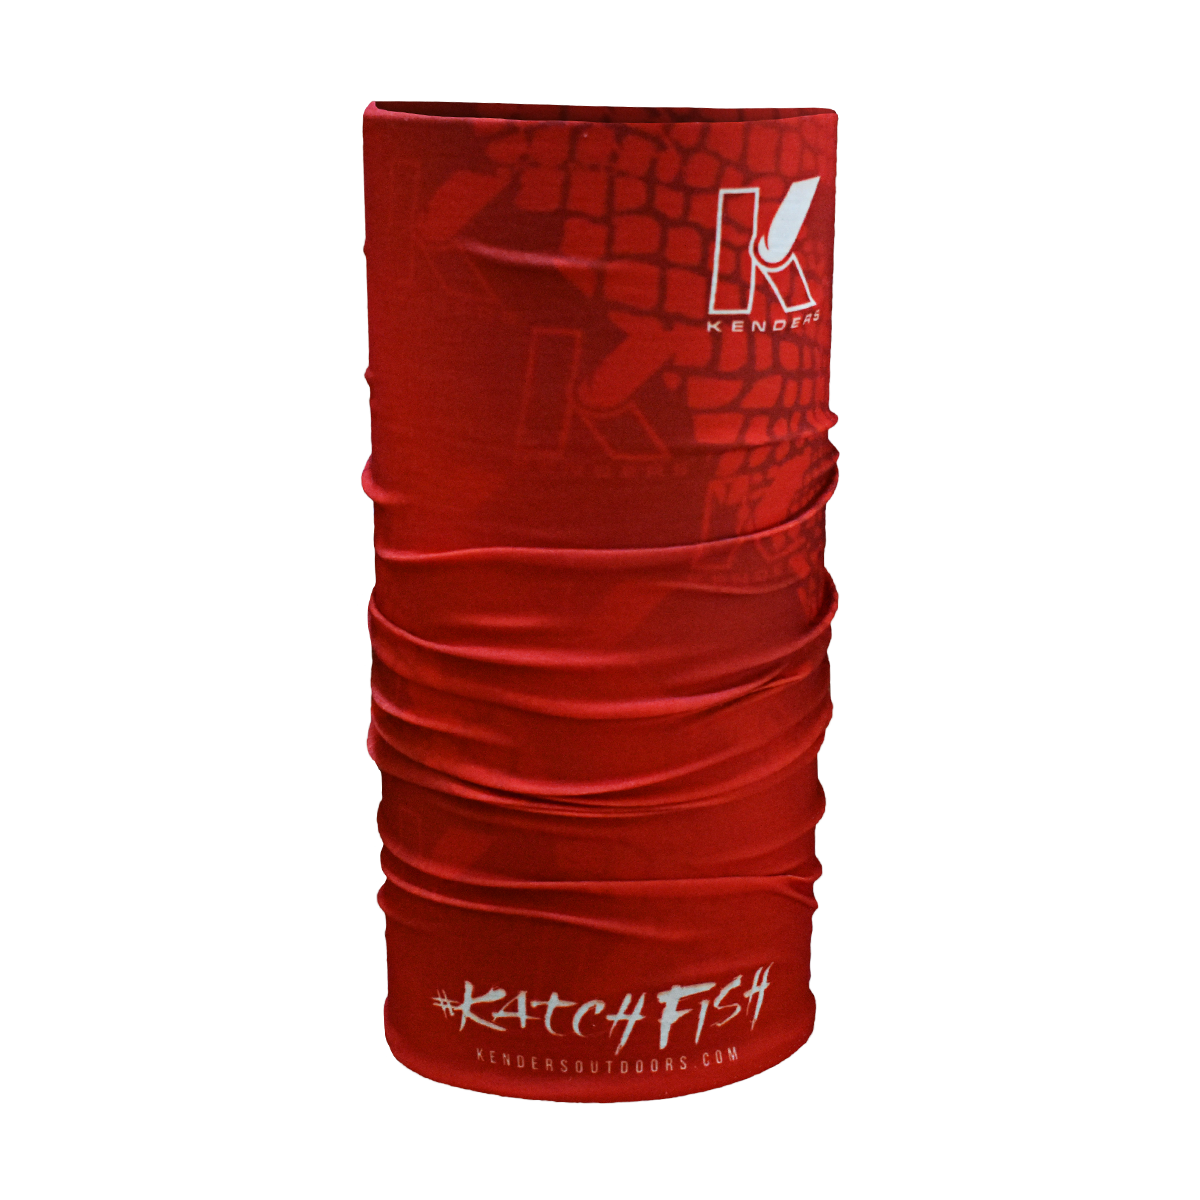 Image of RED KENDERS DYE SUB FACE SHIELDZ (SKIN PROTECTION)